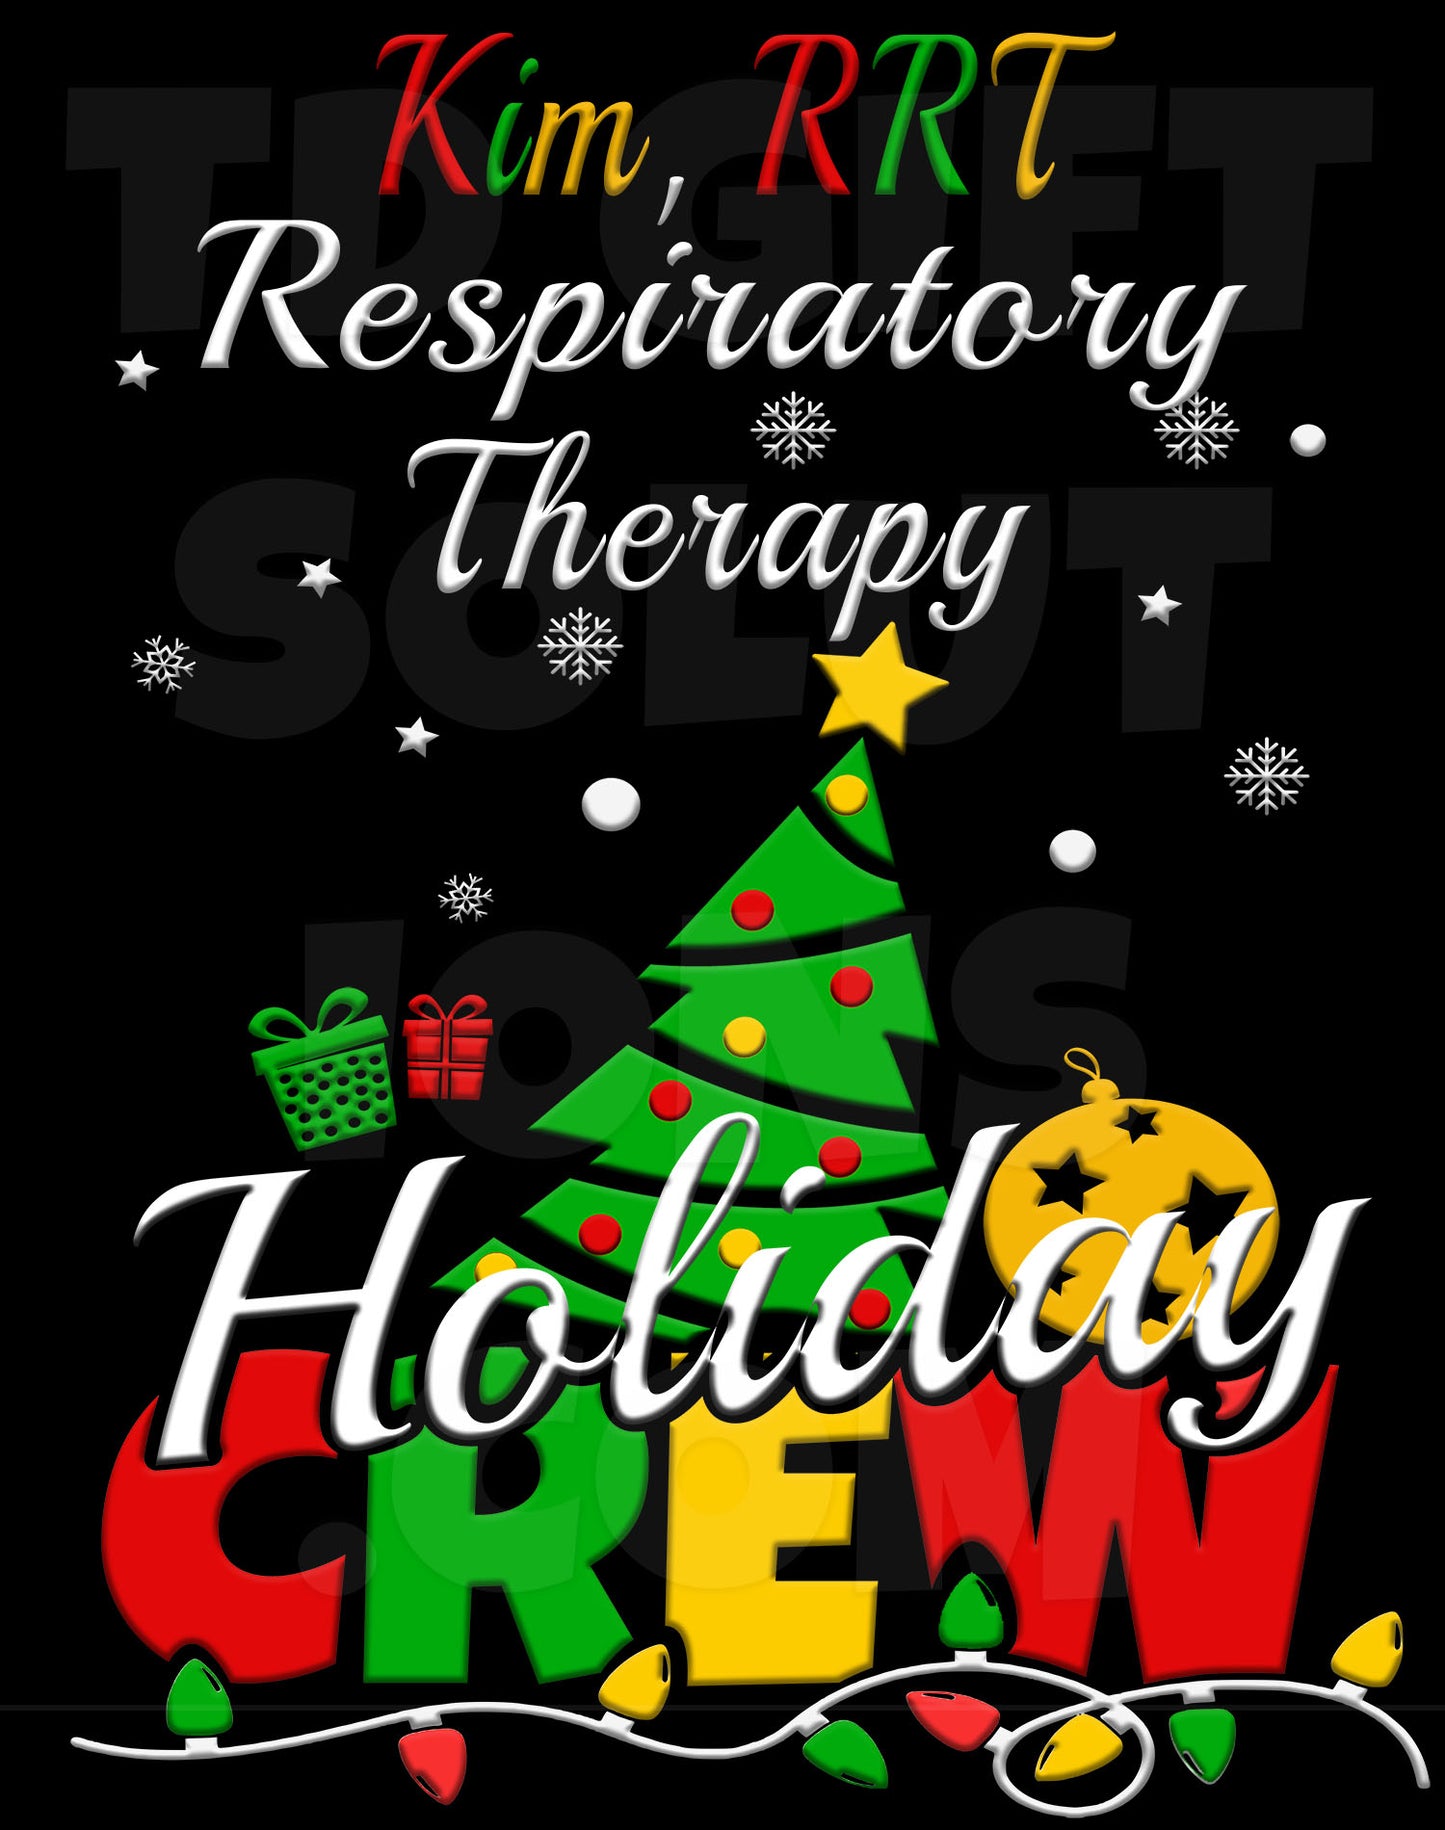 Personalized Respiratory Therapy Holiday Crew Shirts-TD Gift Solutions.com